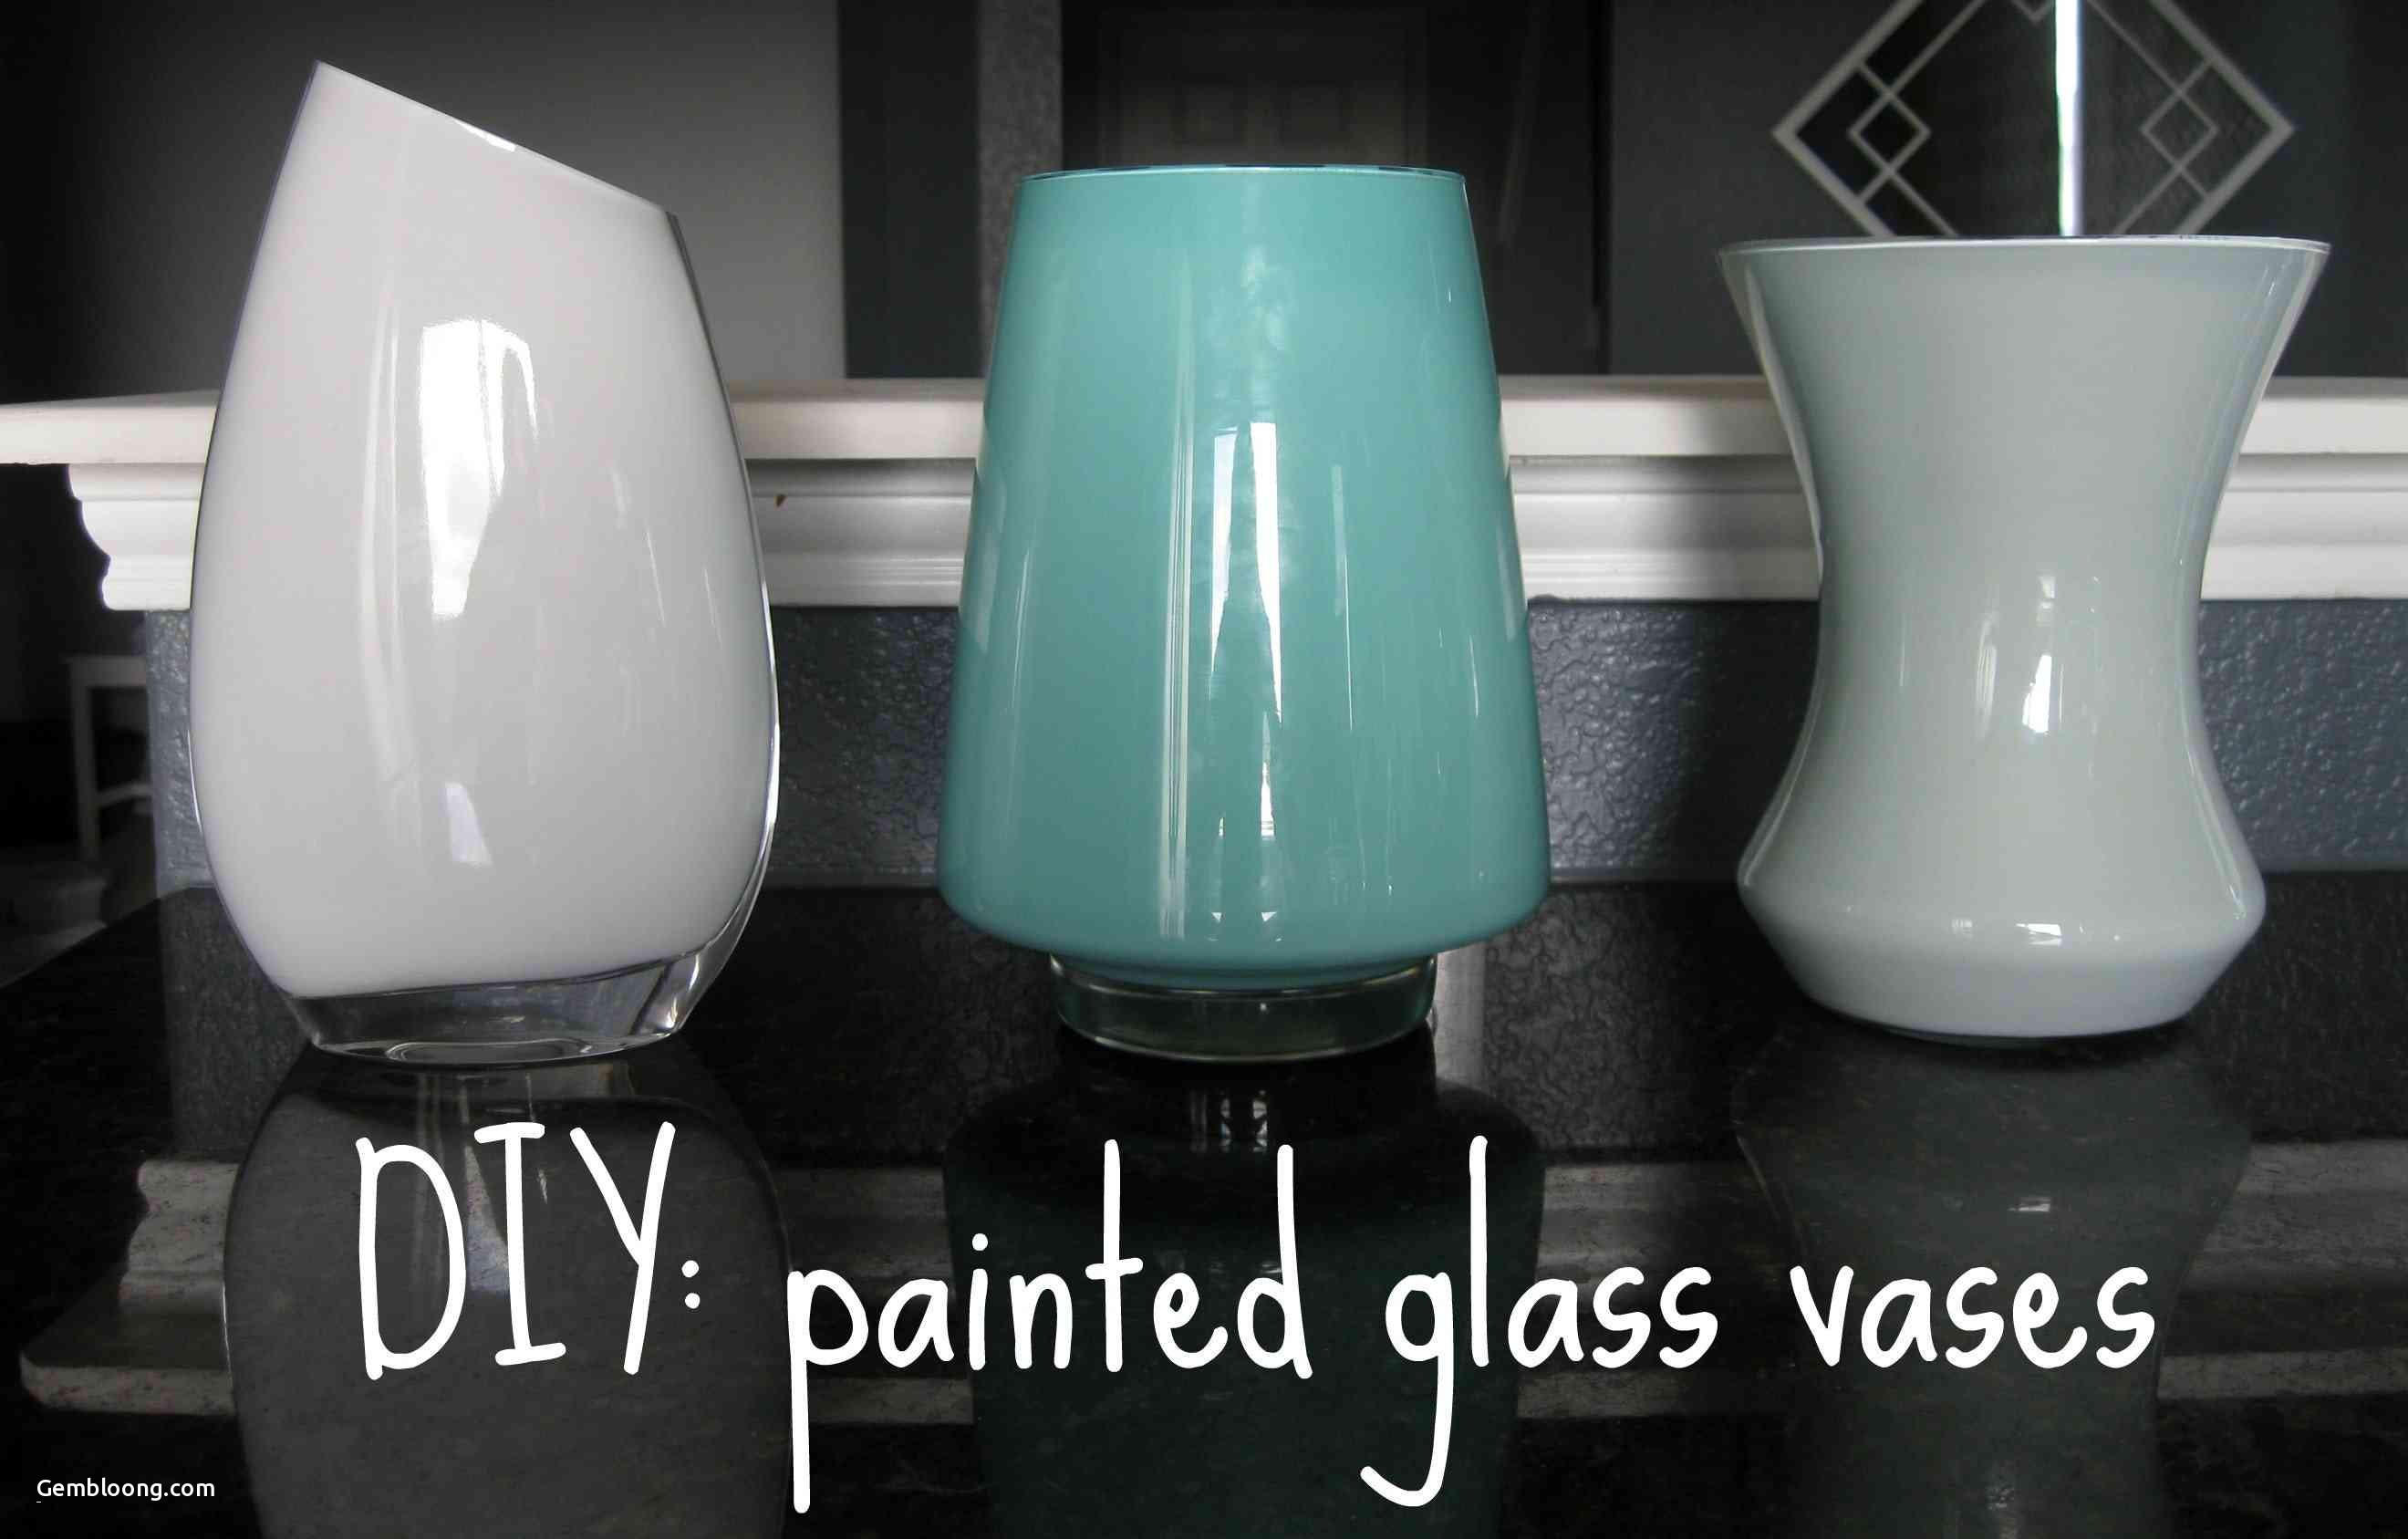 11 Elegant Light Up Vases 2024 free download light up vases of how much is food coloring can paint fresh h vases paint vase i 0d intended for heathermarxgallery how much is food coloring kitchen coloring new inside paint new h vases pa